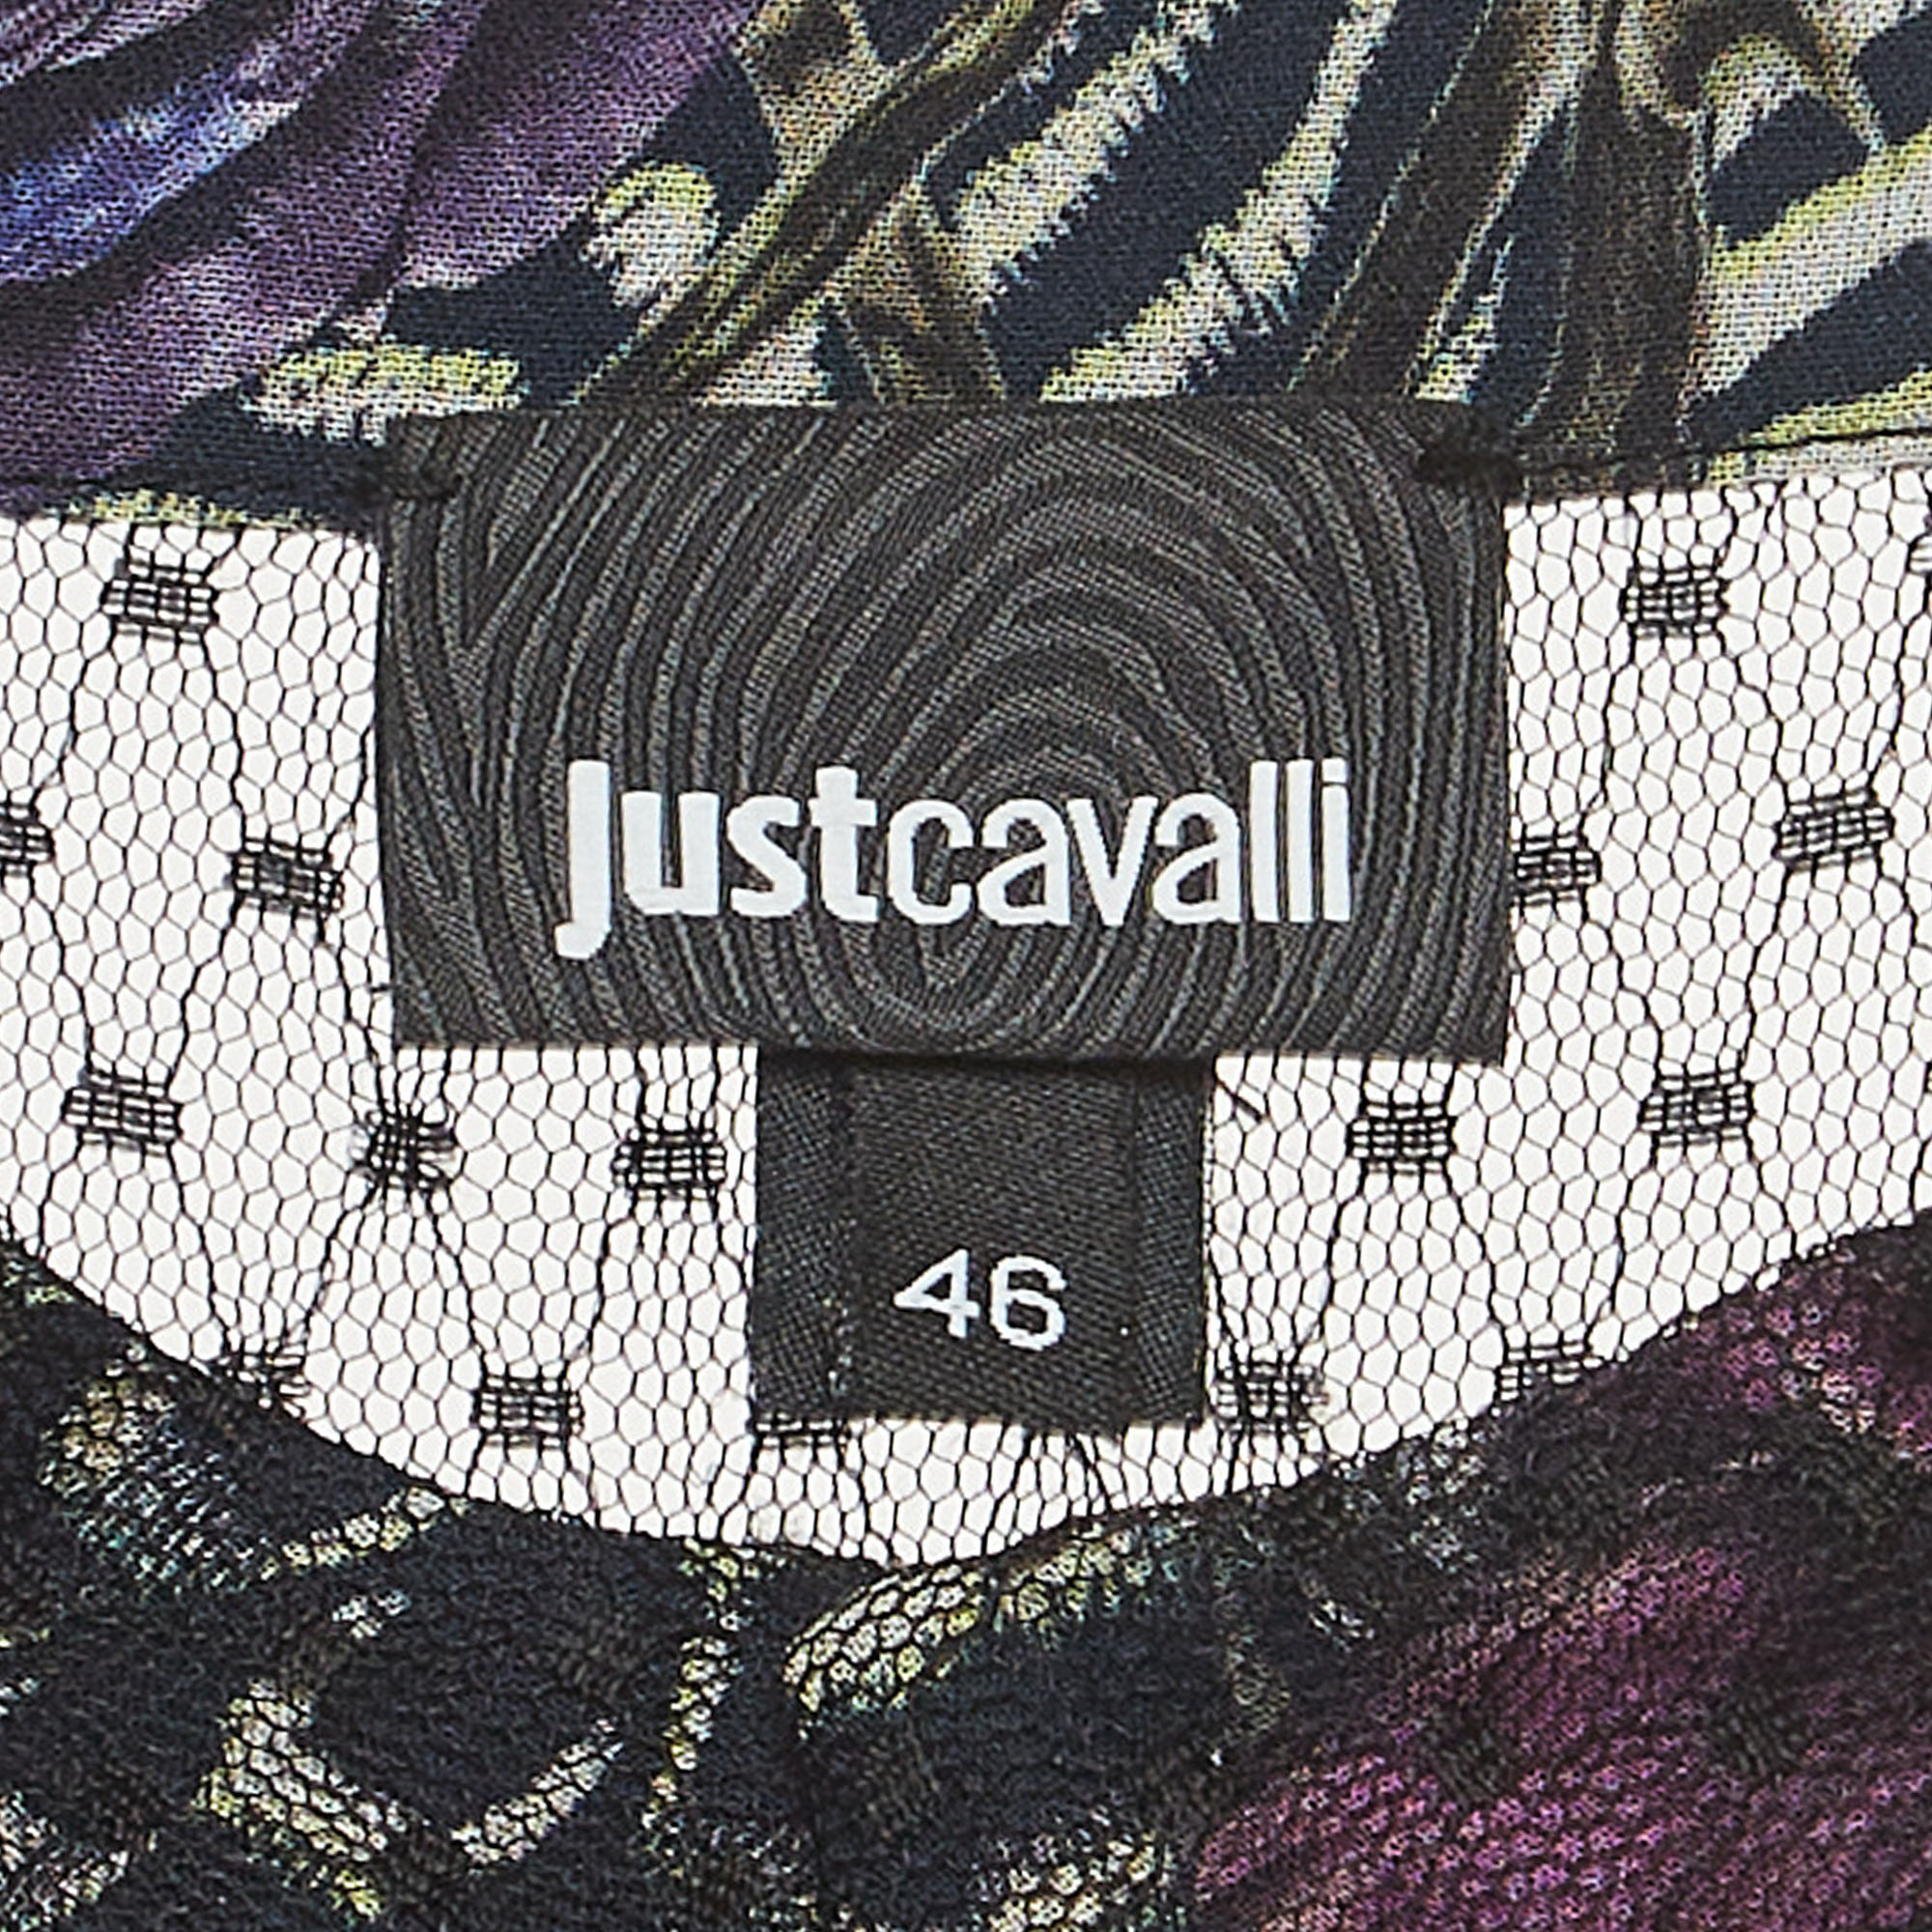 Just Cavalli Purple/Black Floral Print Crepe And Tulle Long Sleeves Top L